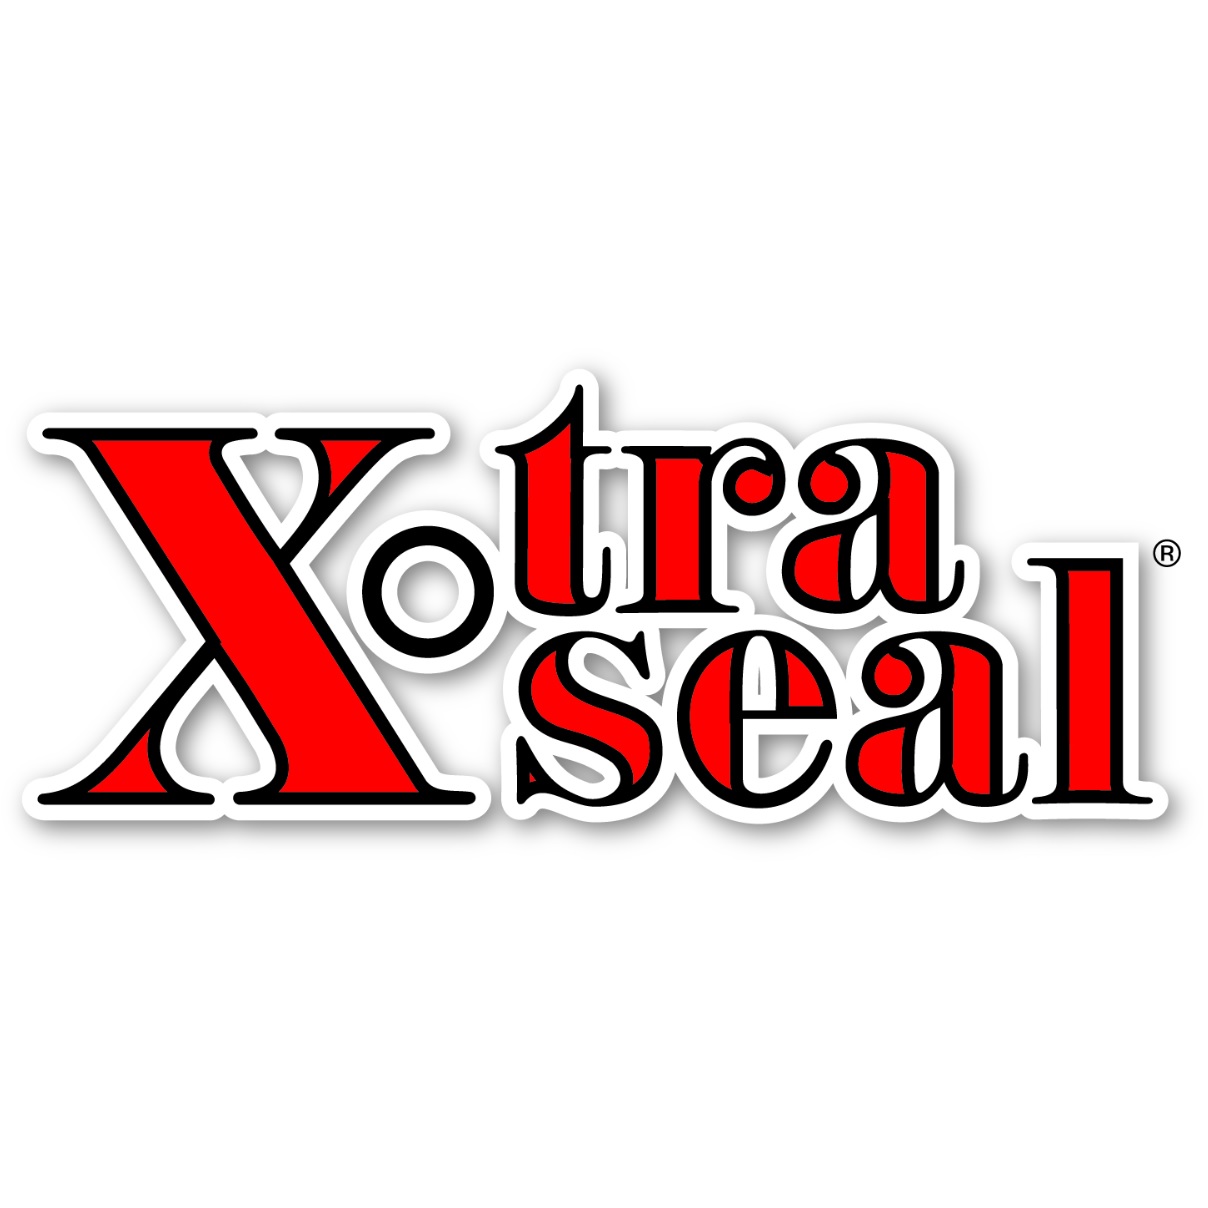 Xtraseal